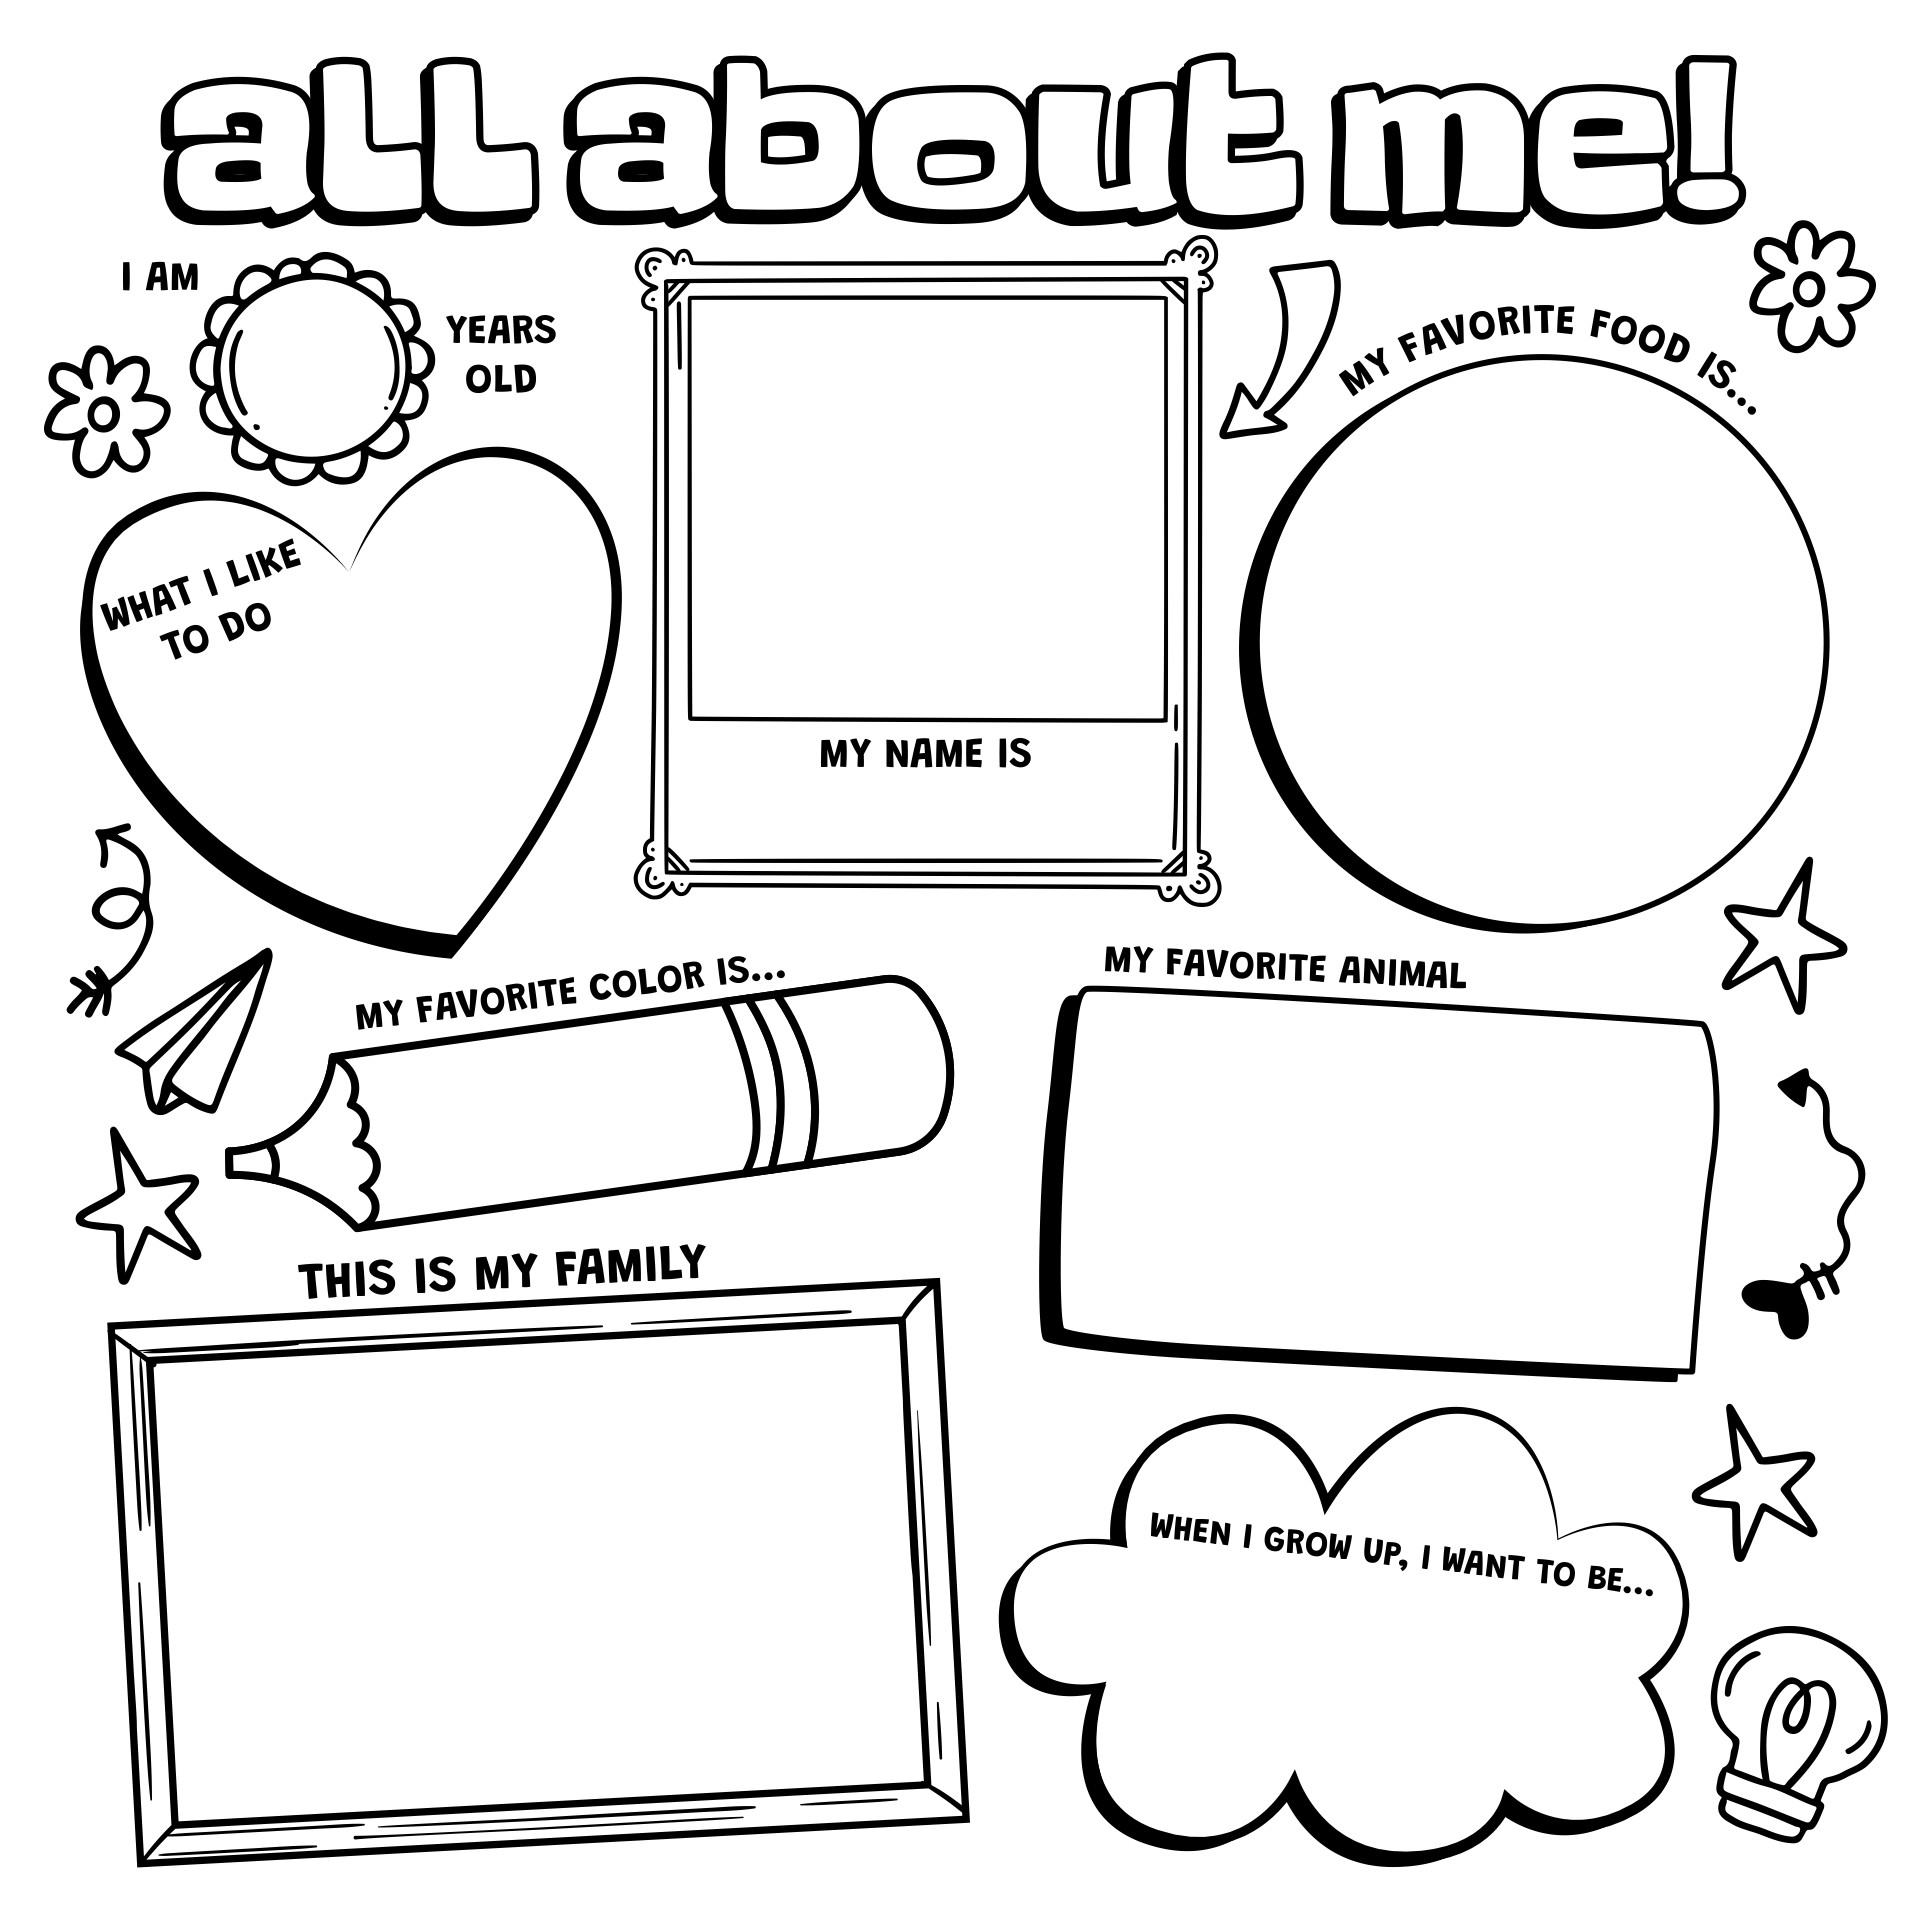 All About Me Student Worksheet Printable